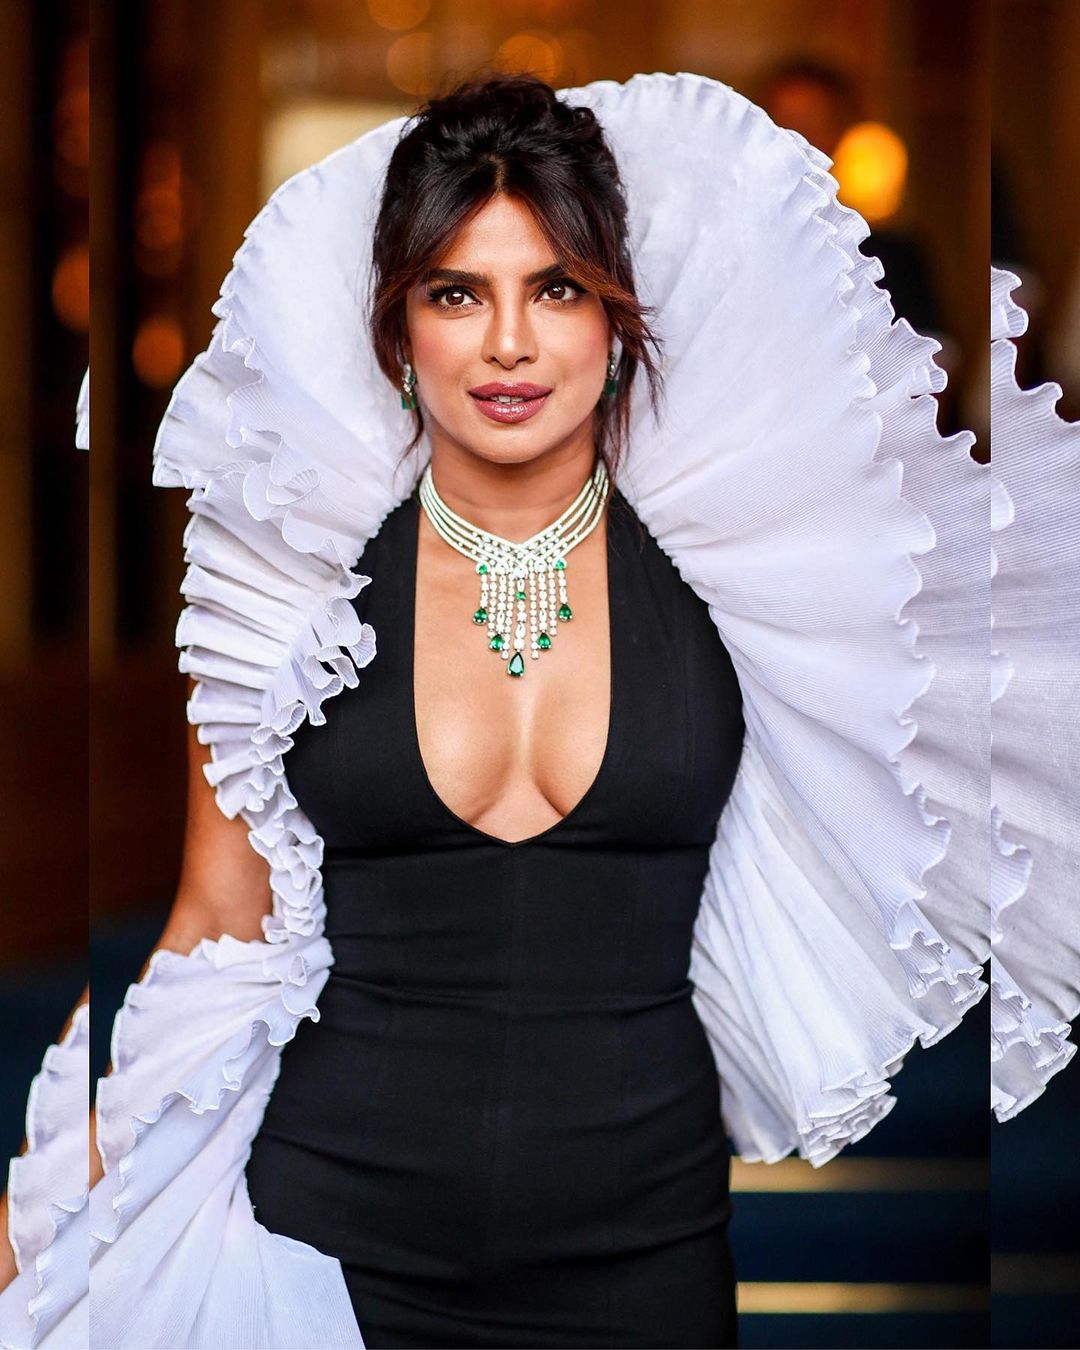 Priyanka Chopra made heads turn in the black gown with white ruffles. Not to mention, the statement neckpiece that was the highlight of the look.